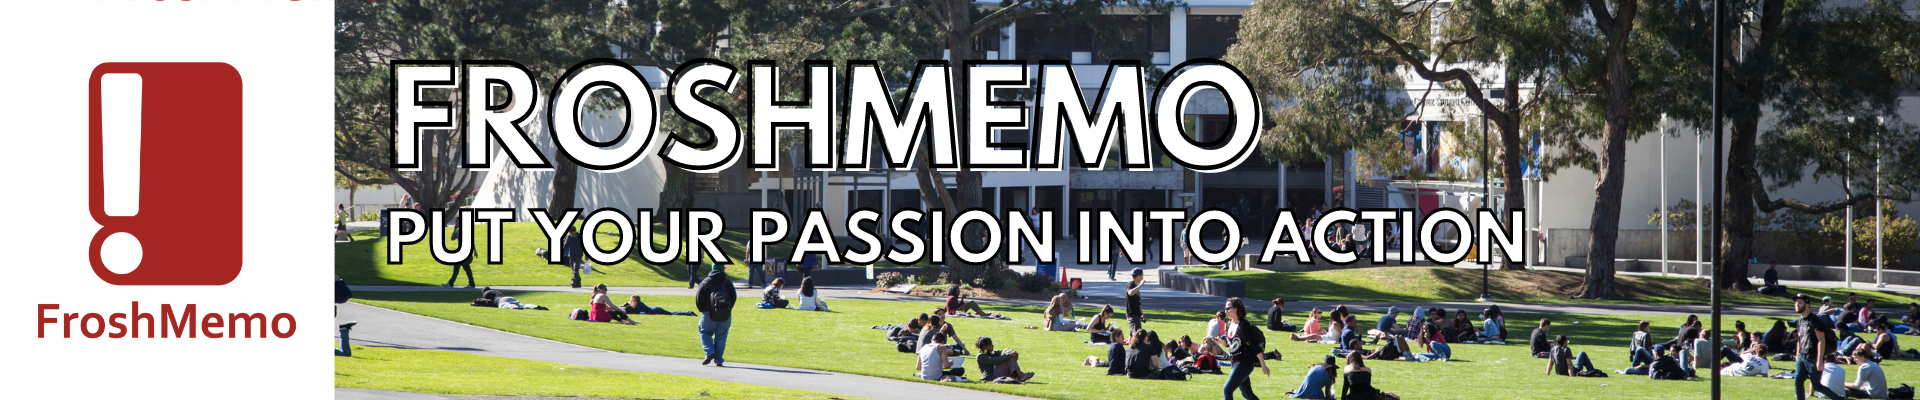 SFSU quad with the text "Frosh Memo Put your Passion Into Action" overlaid